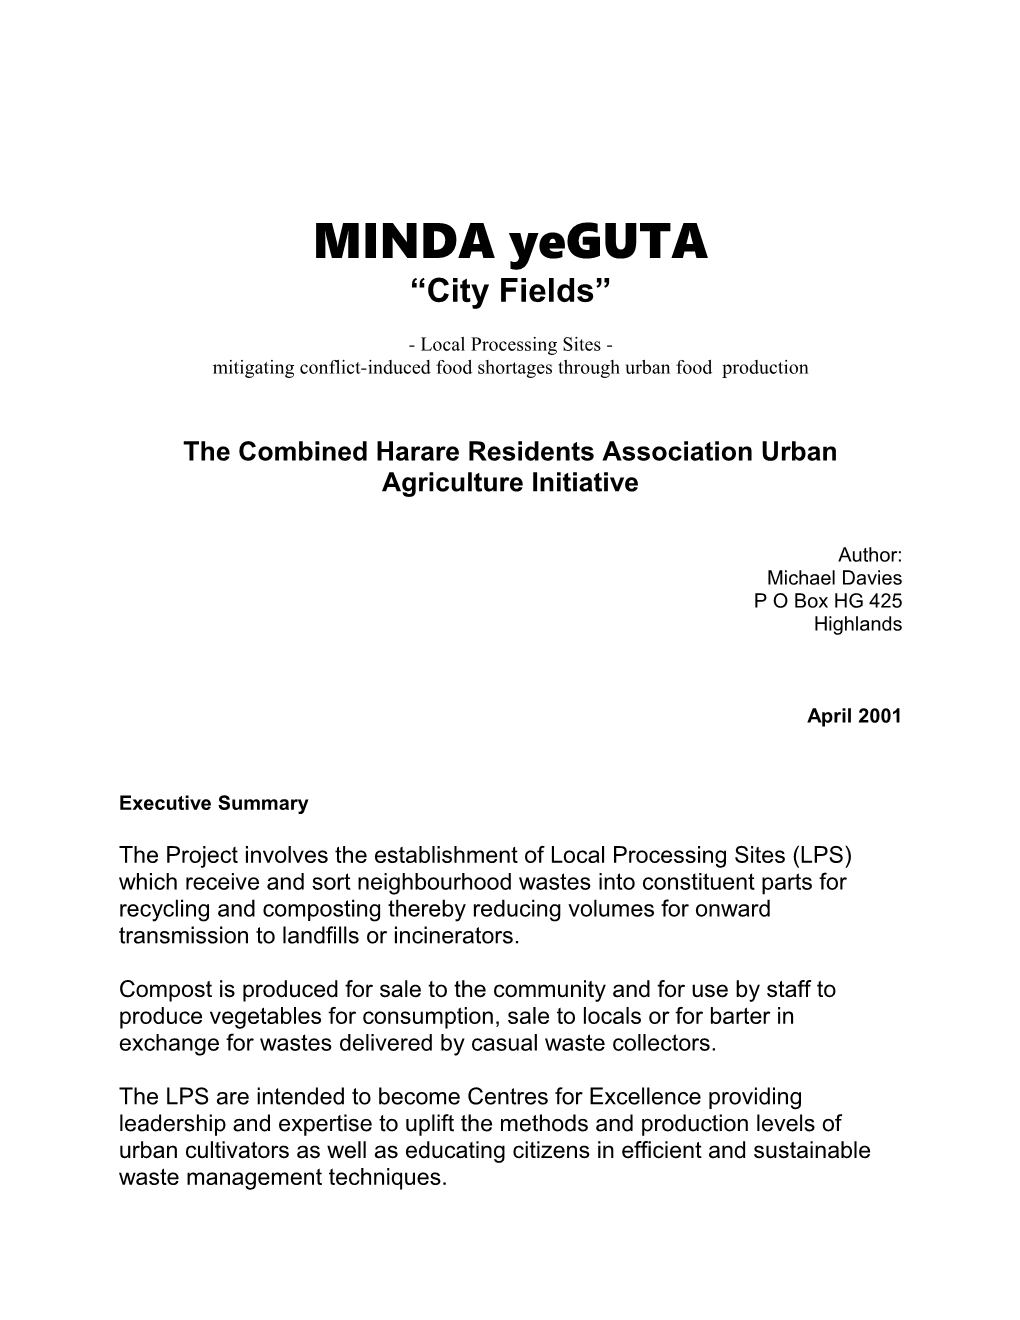 The Combined Harare Residents Association Urban Agriculture Initiative